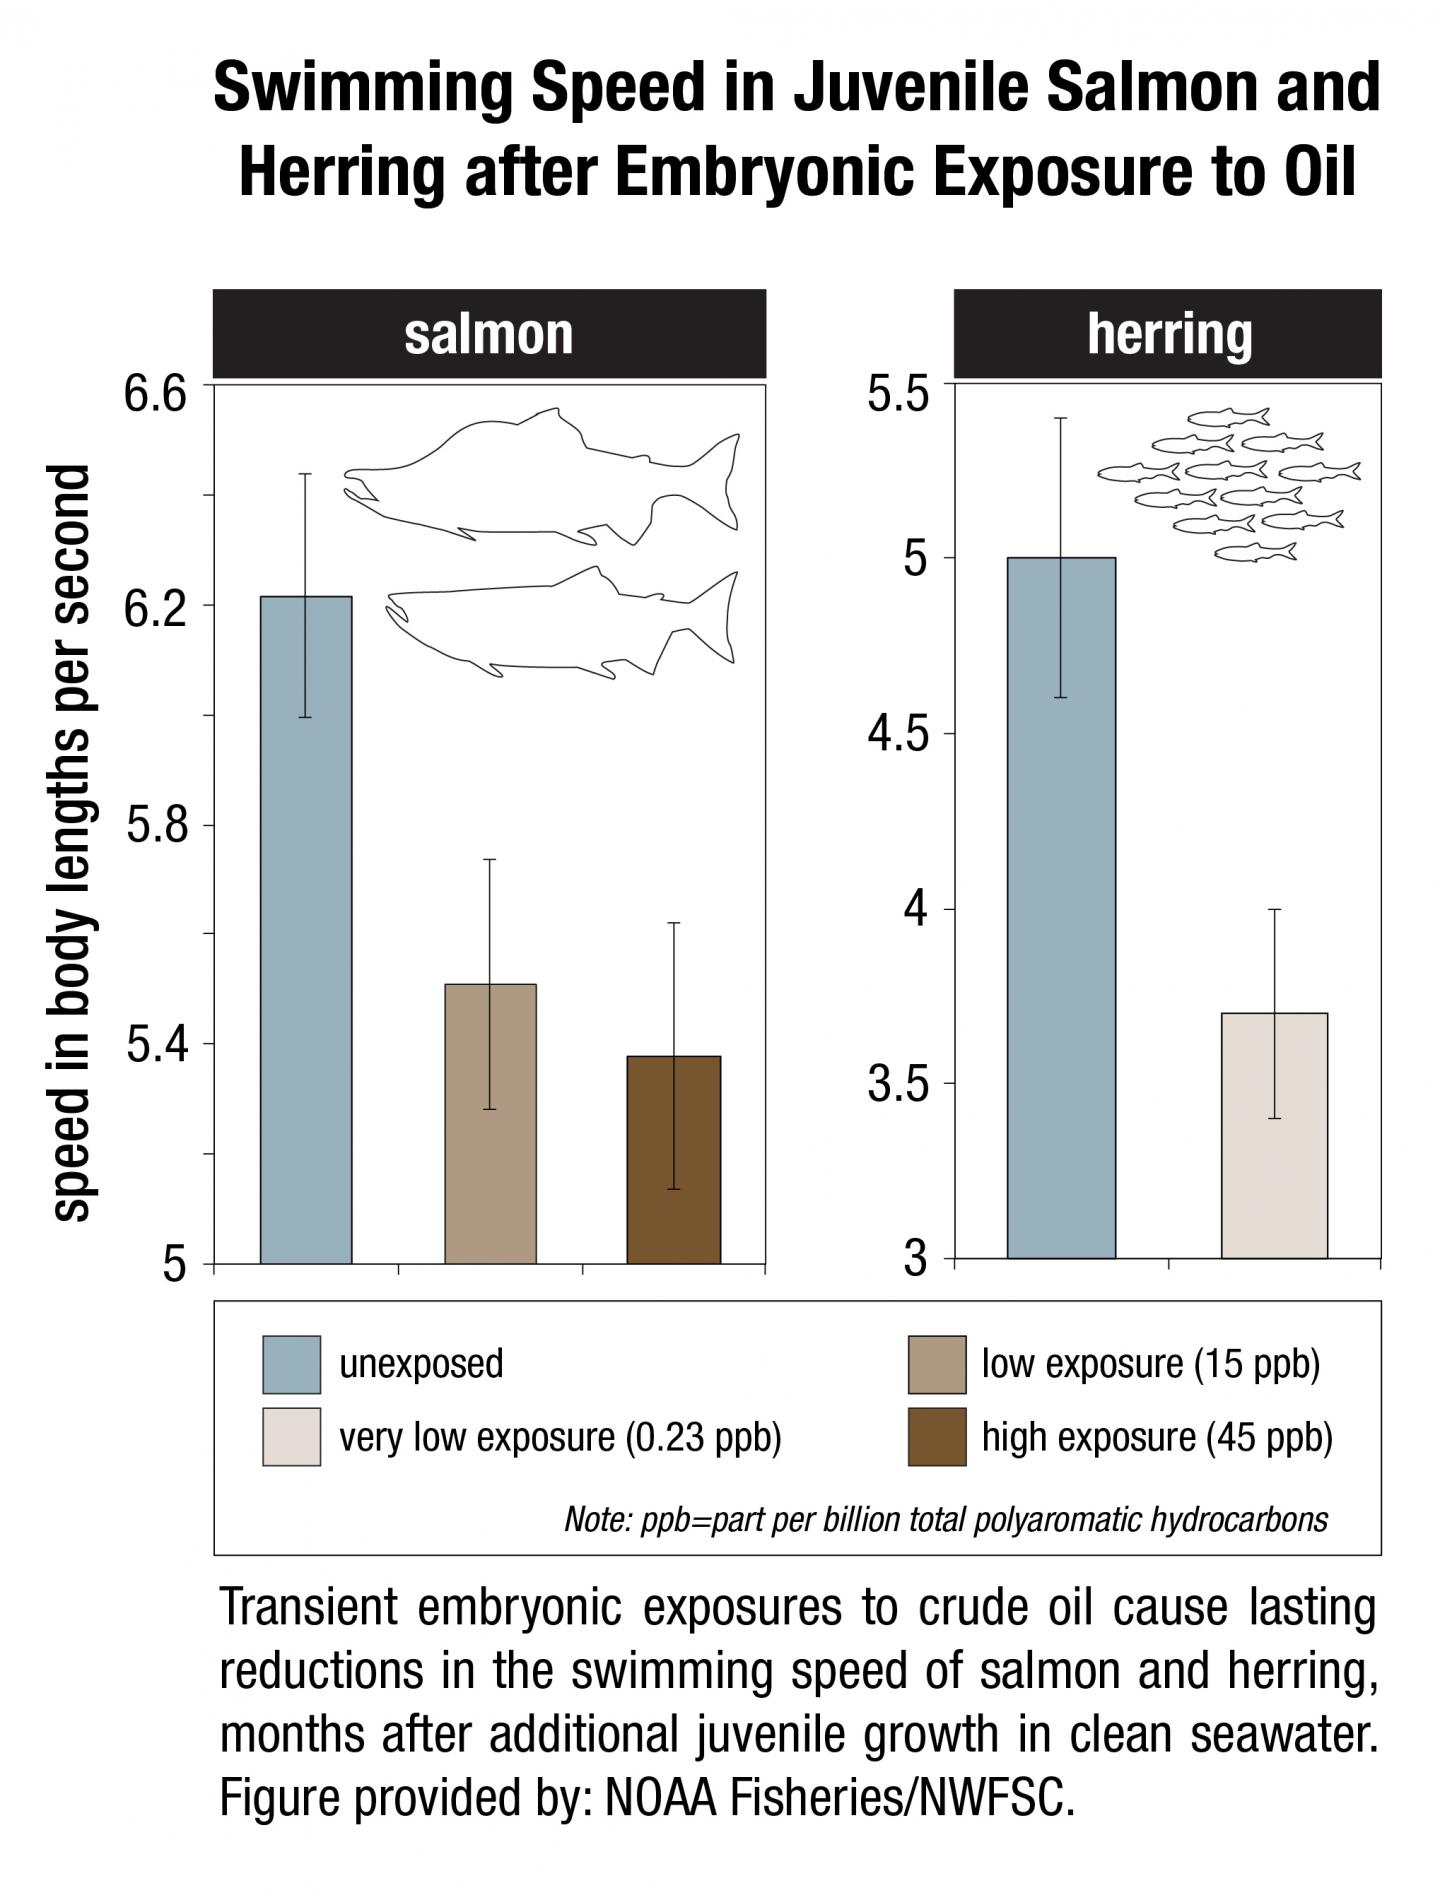 Embryonic Oil Exposure Slows Swimming of Juvenile Fish